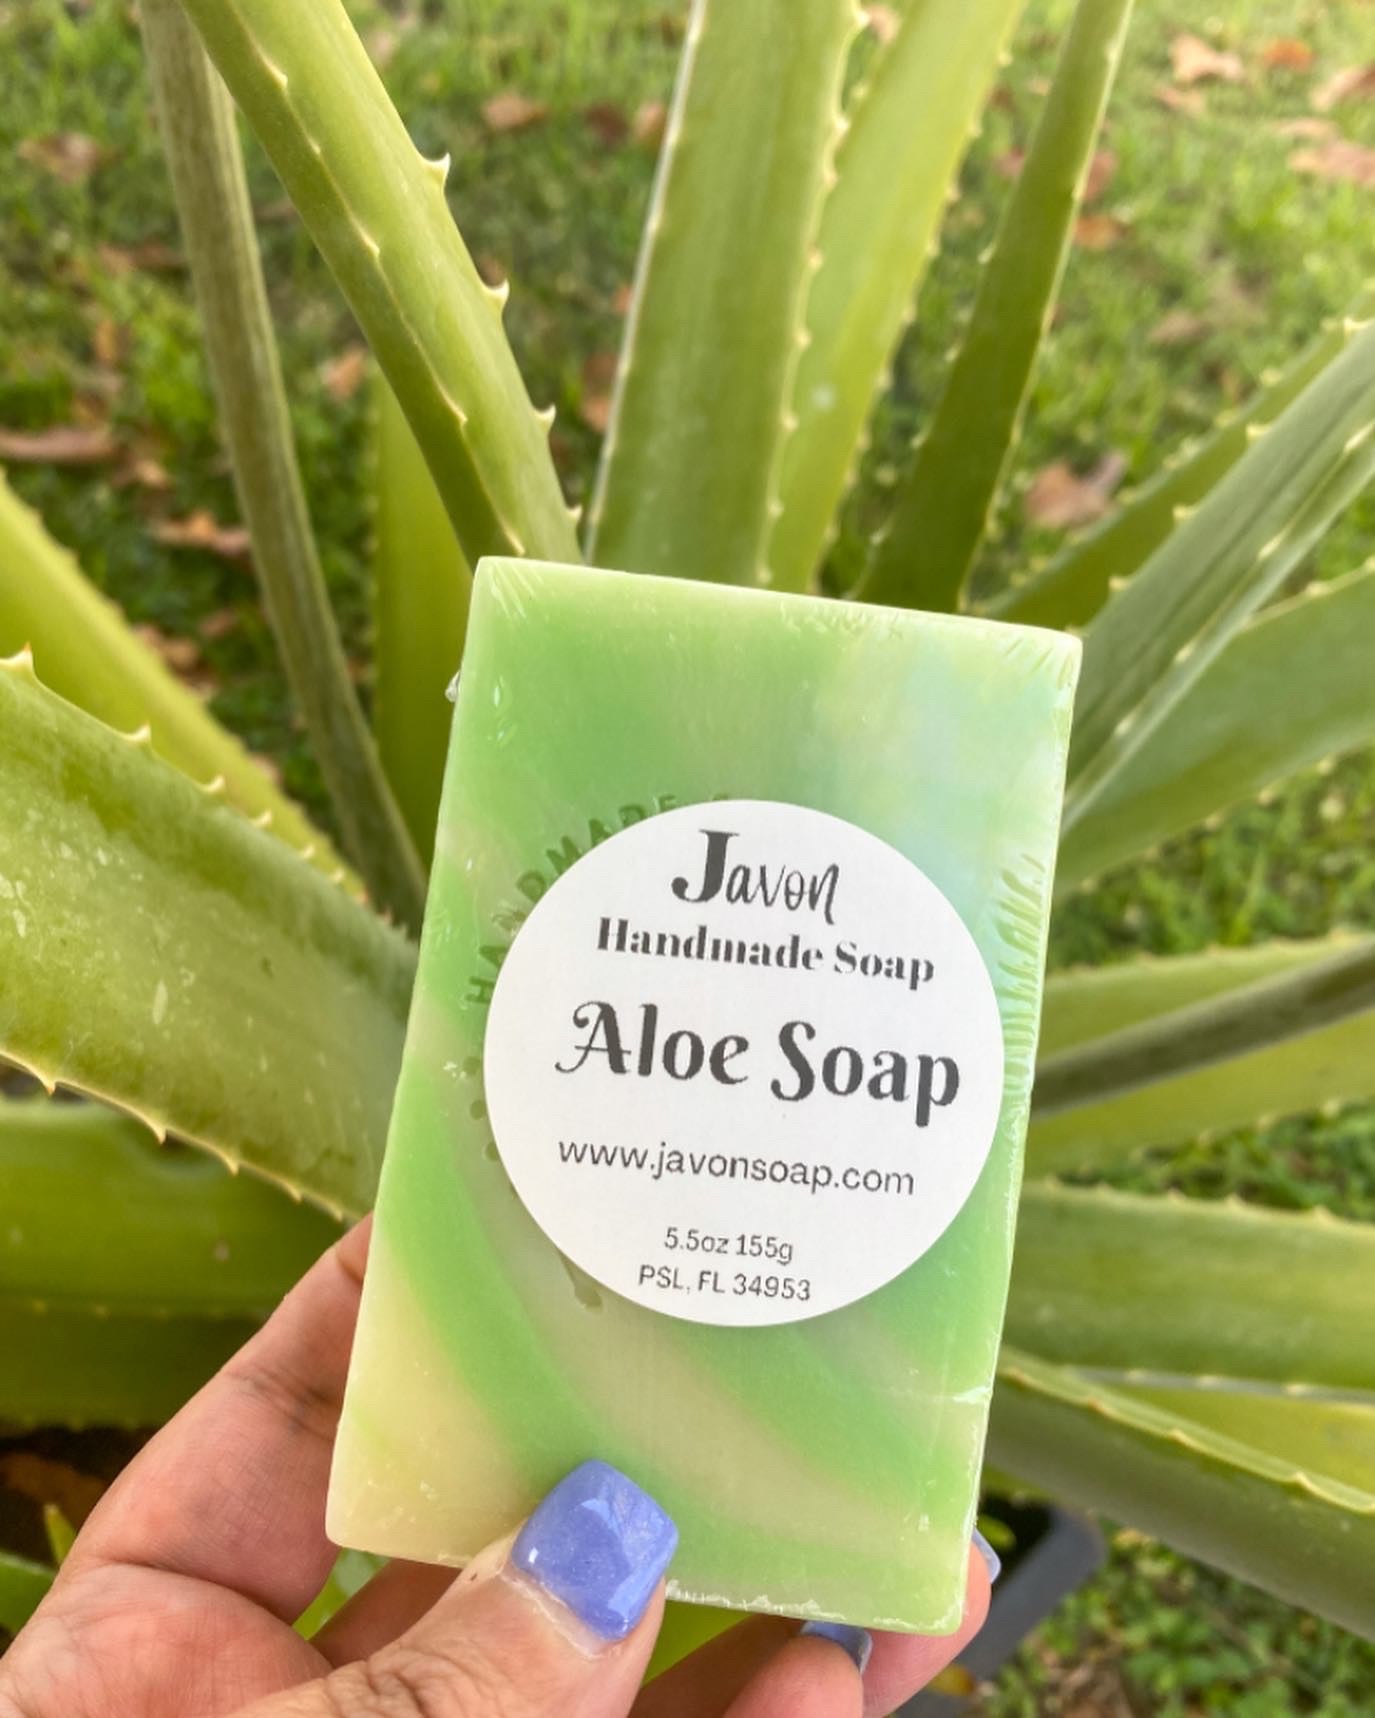 Rejuvenate Your Skin with Fresh Aloe Vera Soap: Embracing Clean Ingredients from Our Garden.